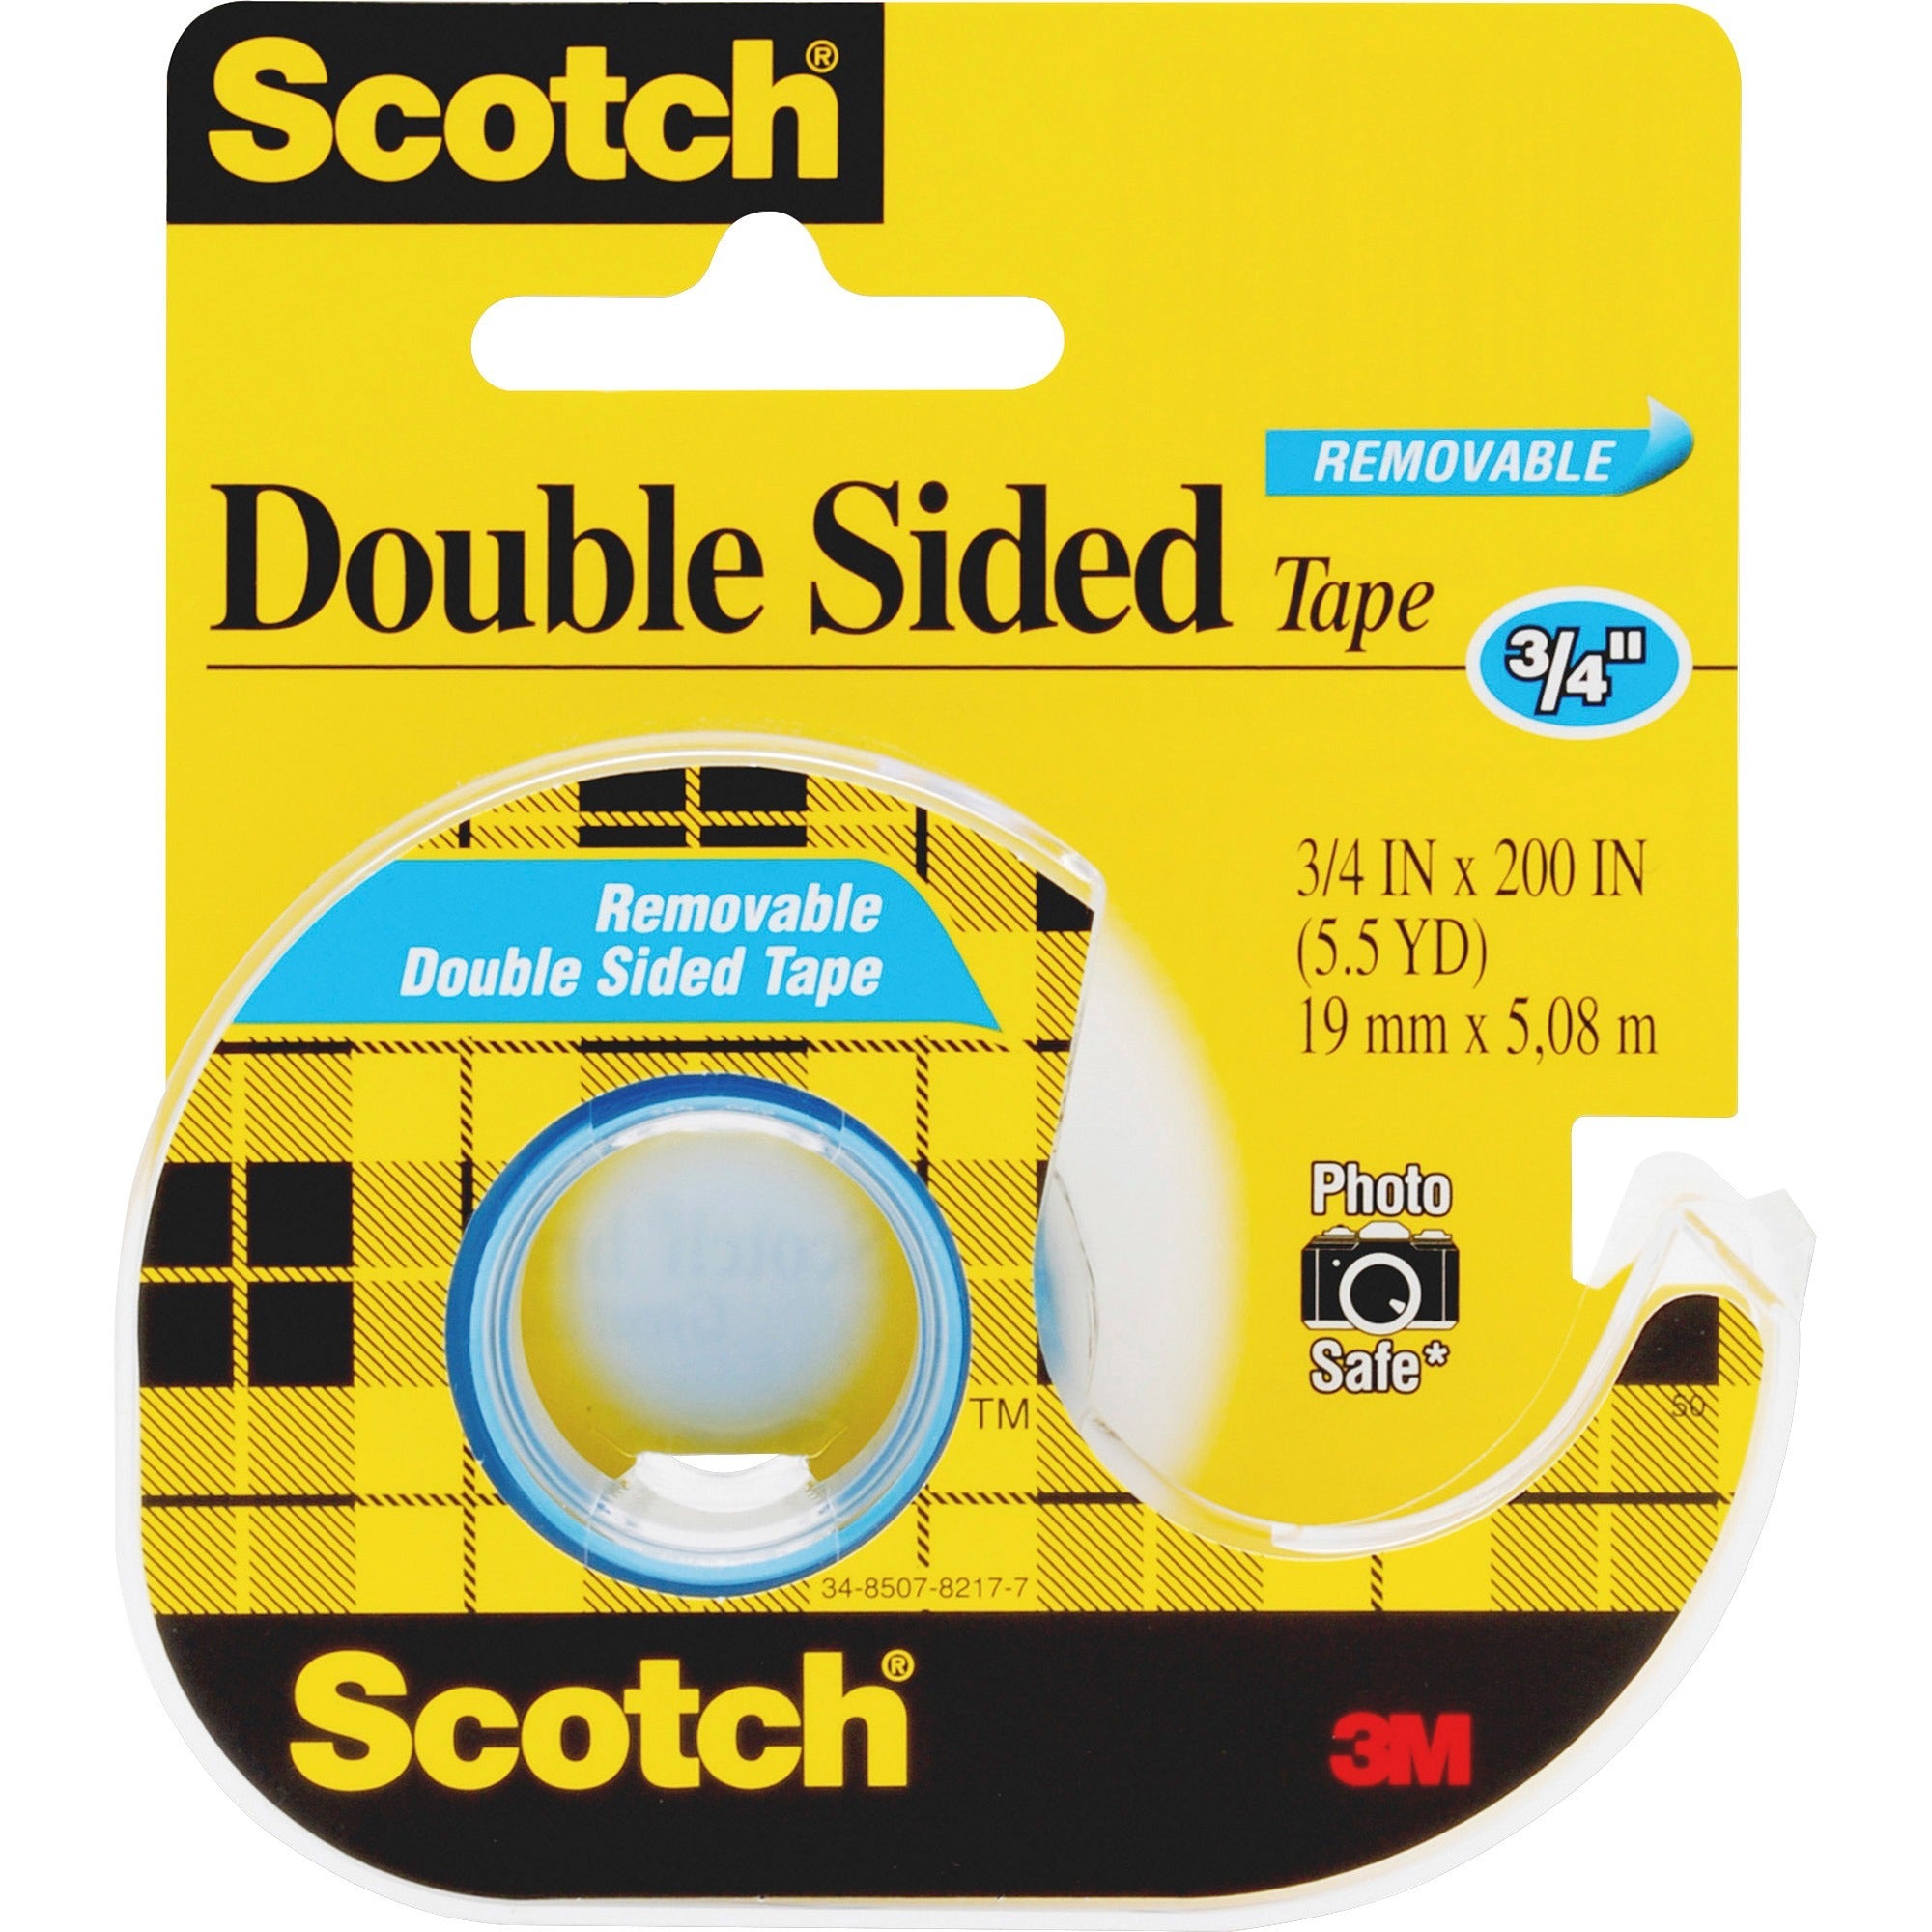 Scotch Double-Sided Photo-Safe Tape - 16.67 ft Length x 0.75" Width - 1" Core - Dispenser Included - Handheld Dispenser - For Sealing, Packing - 1 / Roll - Clear - 